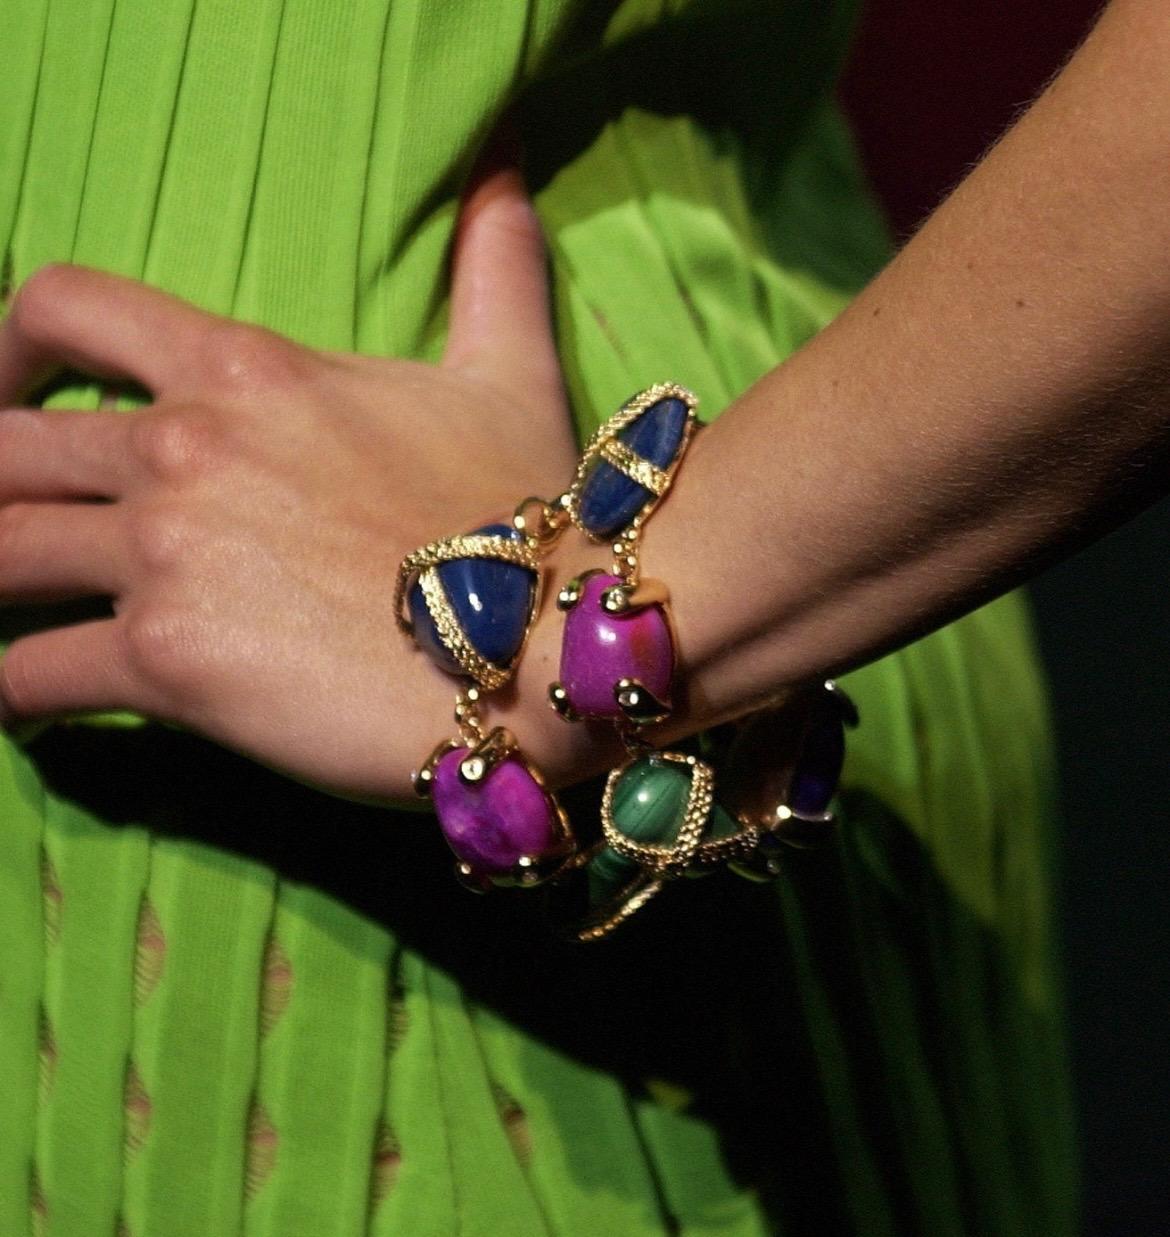 Gold-tone multi-colored stone bracelet with Medusa pendant accent. This bracelet was featured on the Spring/Summer 2003 Gianni Versace runway by Donatella on look numbers 10, 16, 17, 35, 38, and 39. Necklace versions of this bracelet were used in